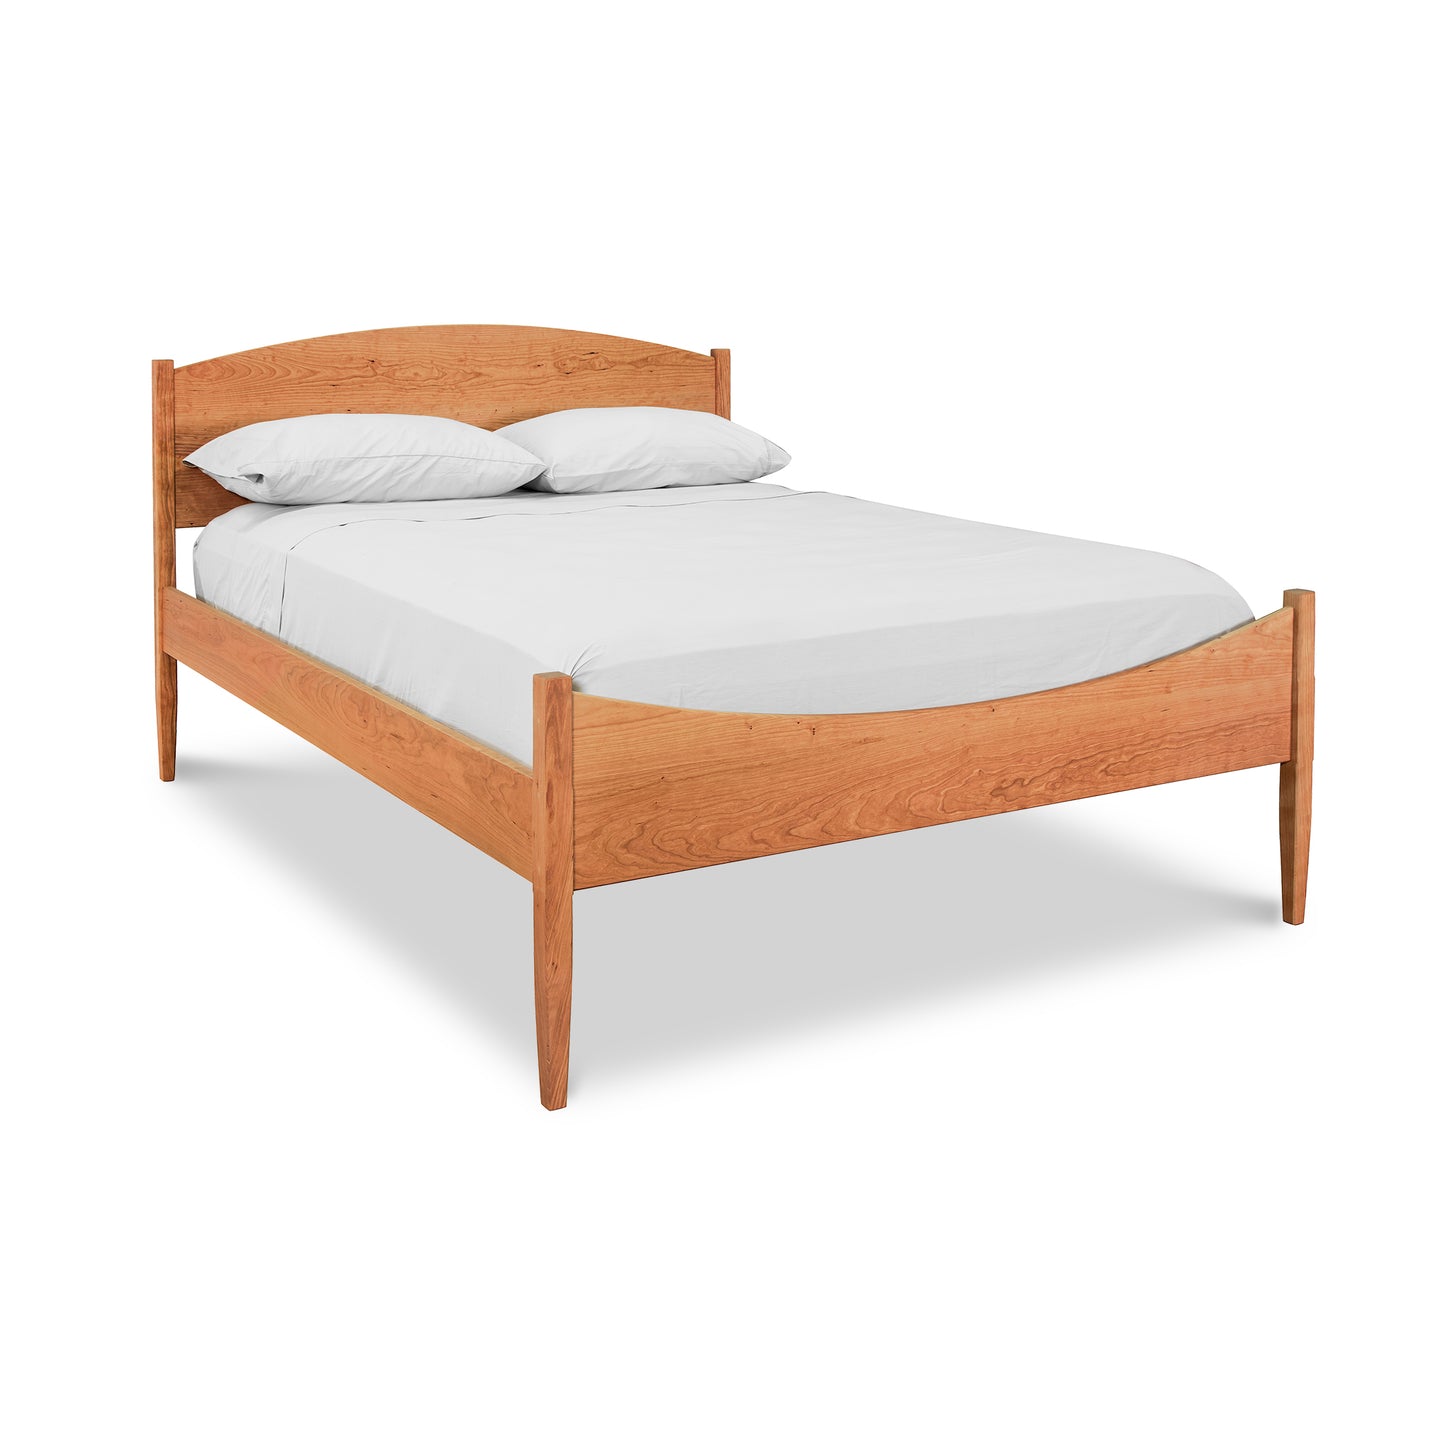 A Vermont Shaker Moon Bed platform bed frame with a simple headboard and footboard, fitted with white bedding and two pillows, isolated on a white background by Maple Corner Woodworks.